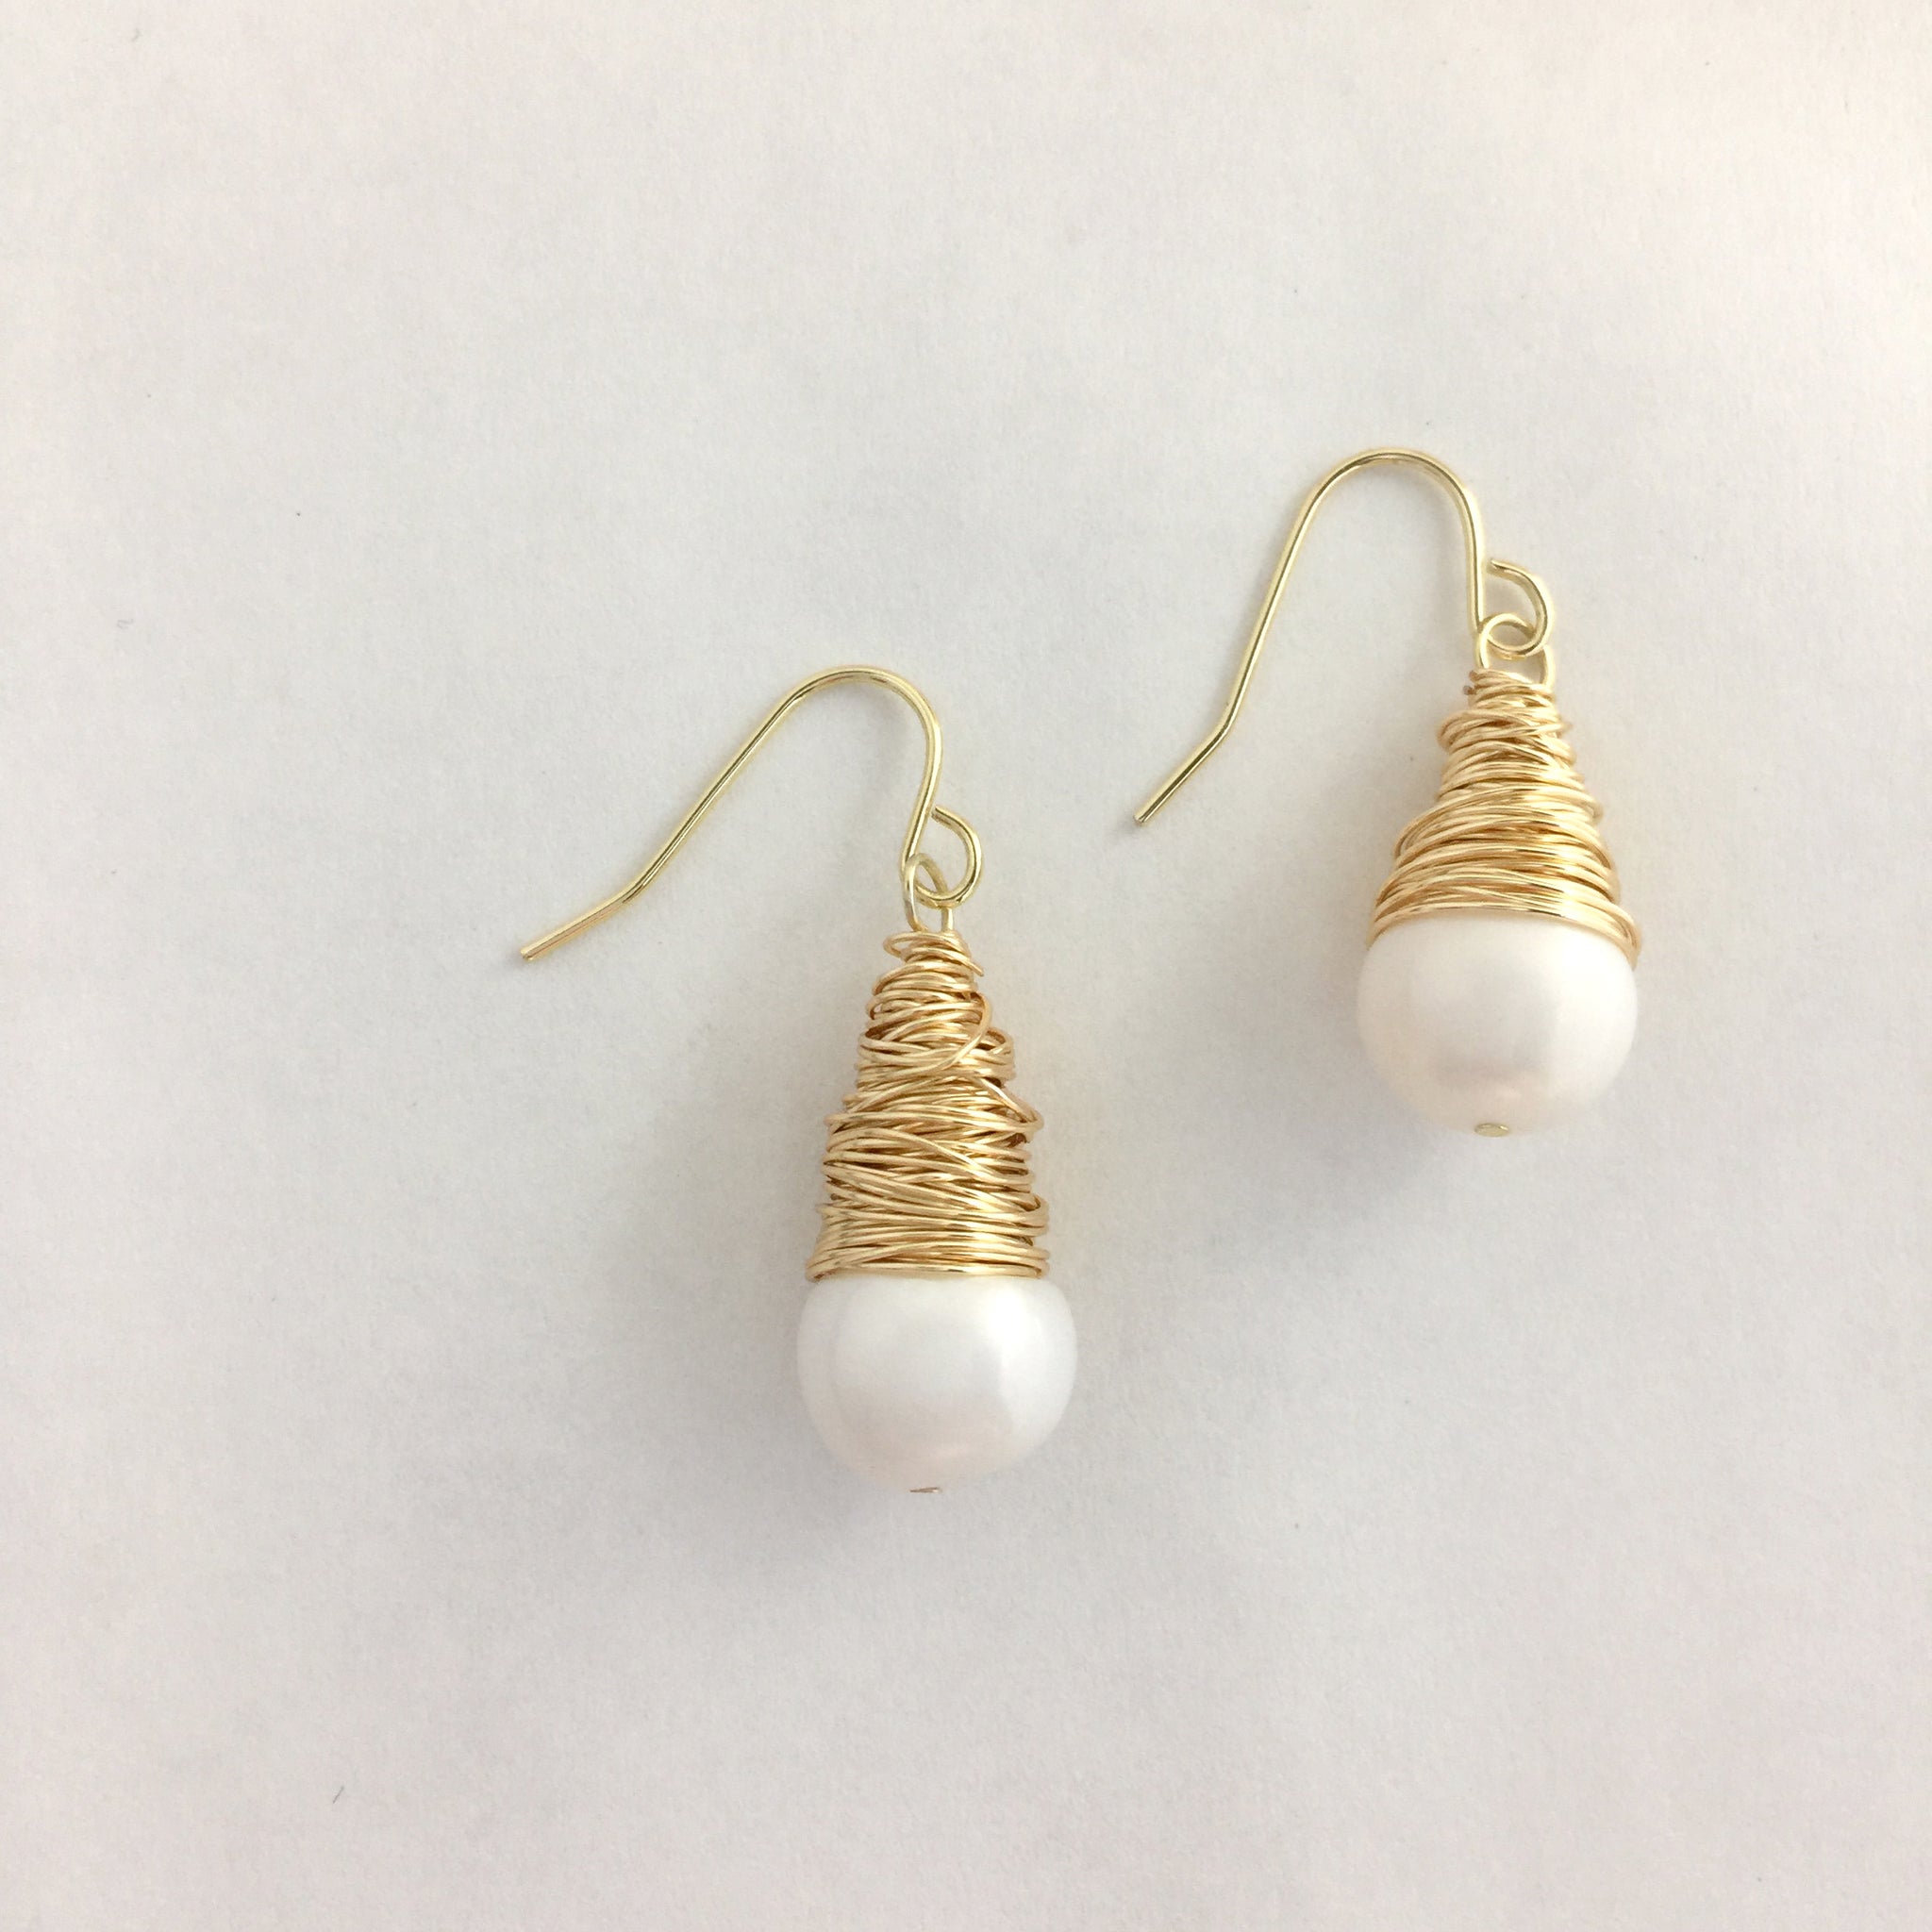 Boho Pearl Dangle Earrings, Baroque Pearl Drop Earrings, Gifts for Mom, 14k Gold and Baroque Pearl Jewelry